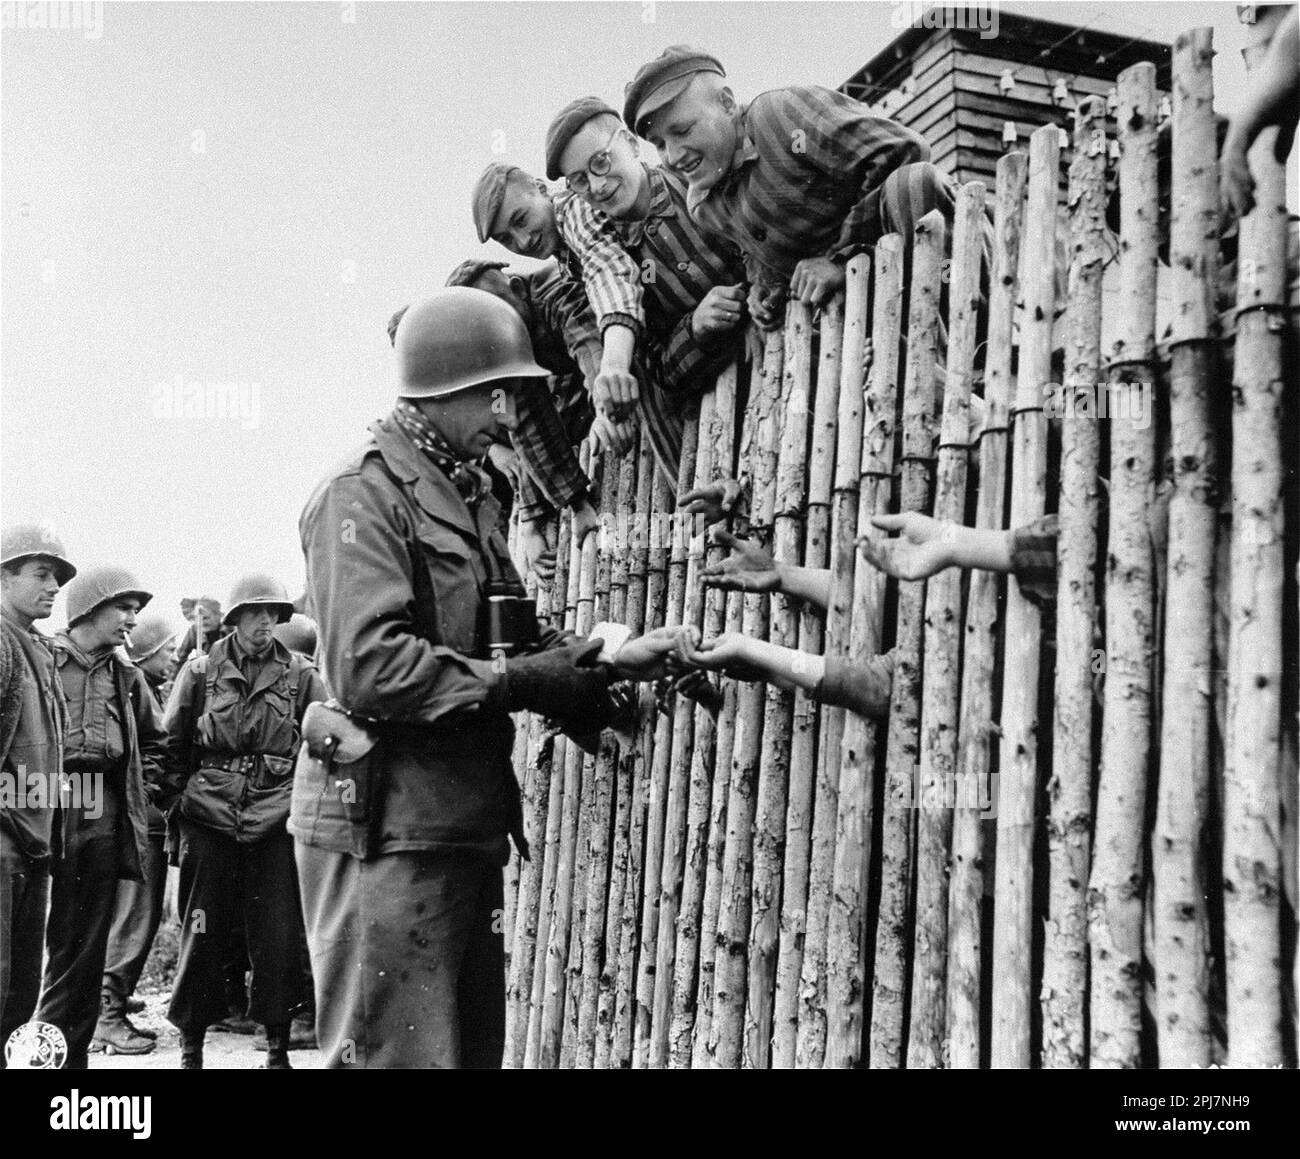 U.S. Army Corporal Larry Matinsk puts cigarettes into the extended hands of newly liberated prisoners behind a stockade in the Allach concentration camp, near Dachau Germany on April 30, 1945. Stock Photo